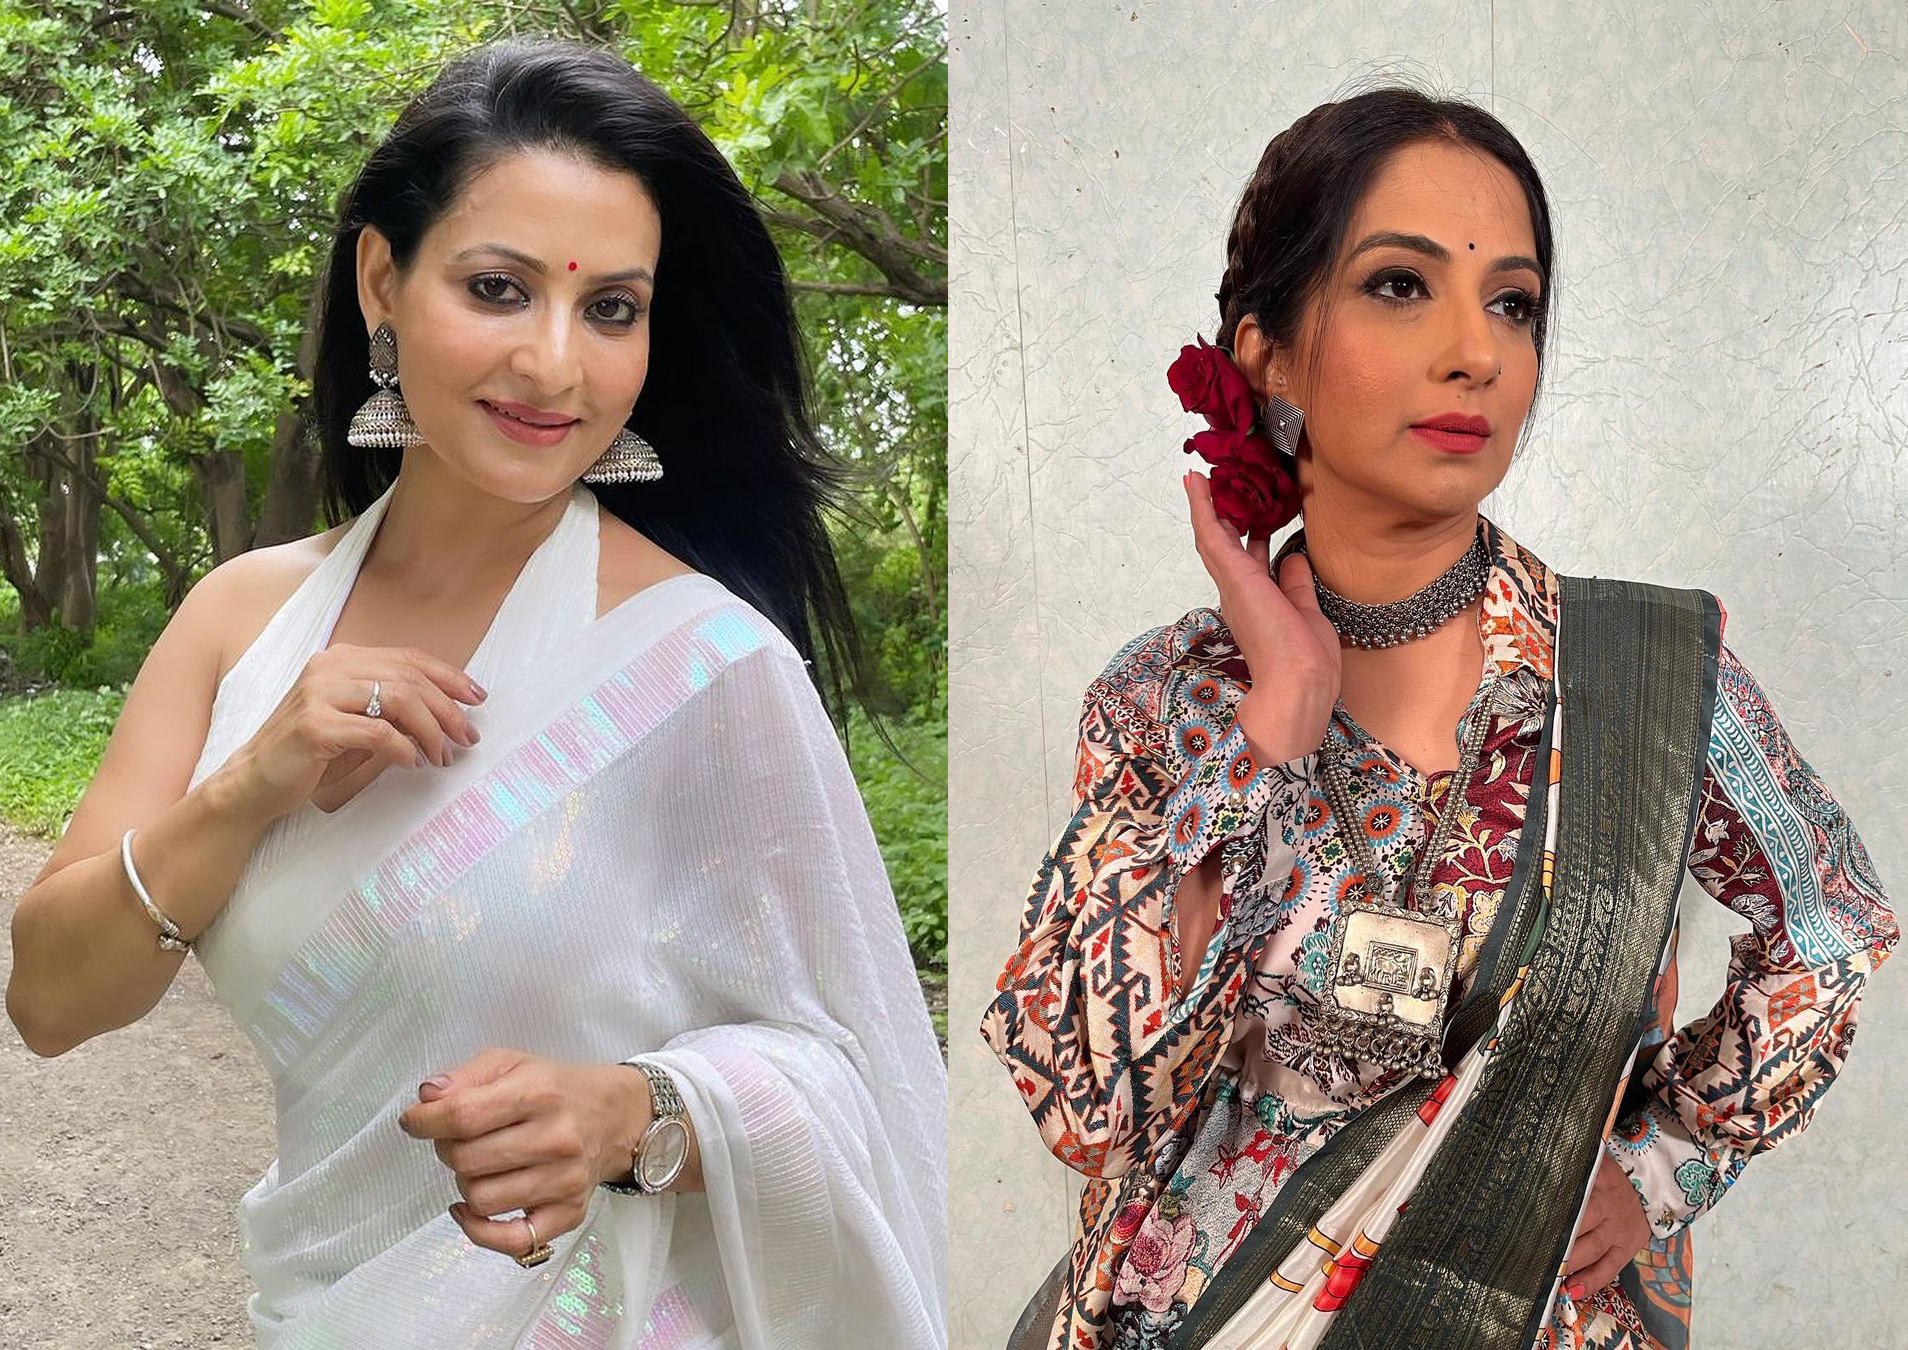 Jhanak: Talented Actress Poorva Gokhale Opens Up About Replacing Stellar Performer Dolly Sohi. She Says It’s Difficult To Take Over Someone Else’s Work!